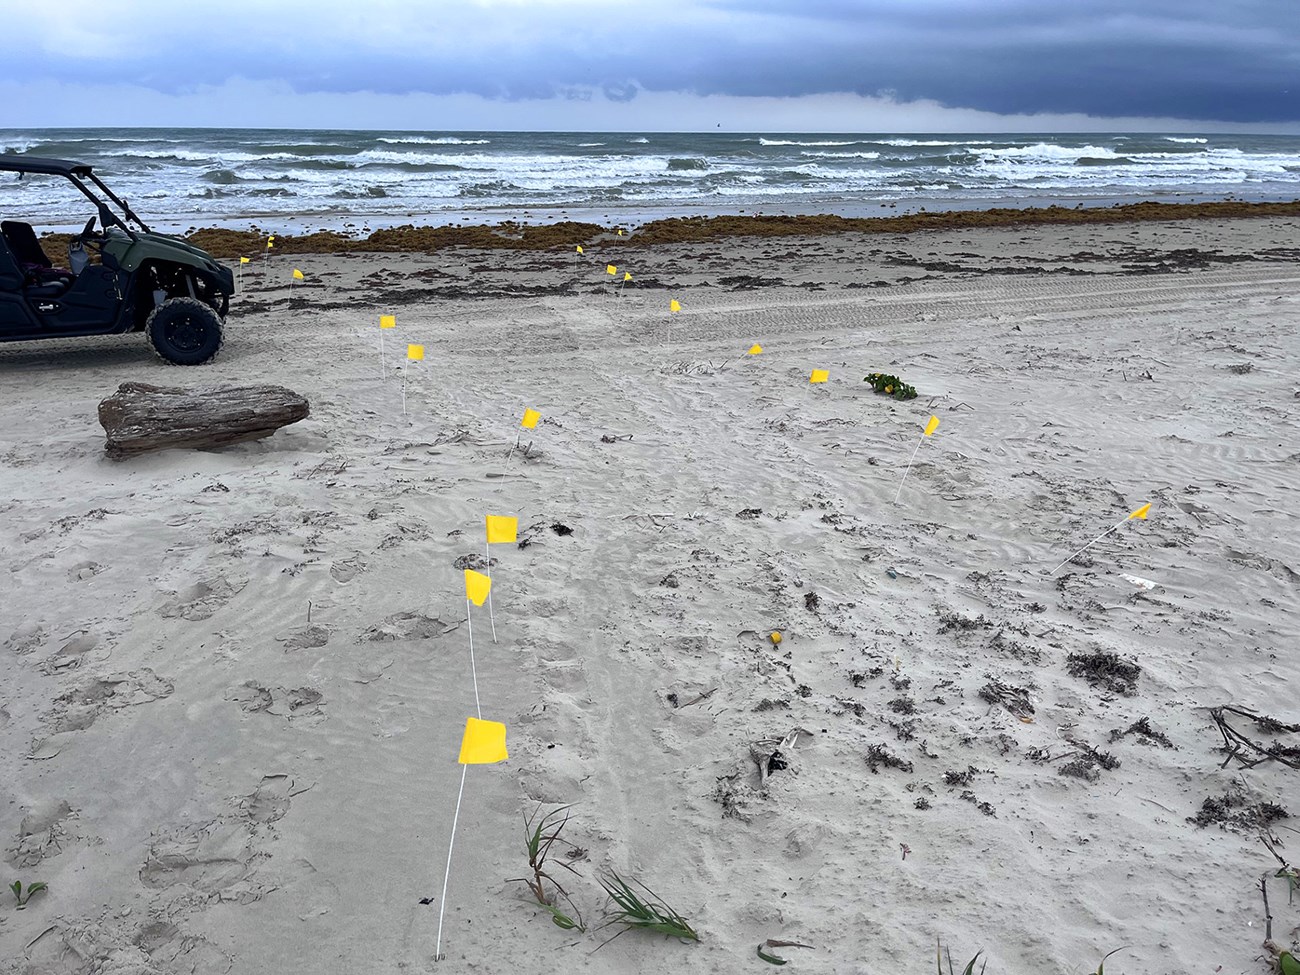 A beach scene showing tracks in the sand marked by a line of yellow flags.